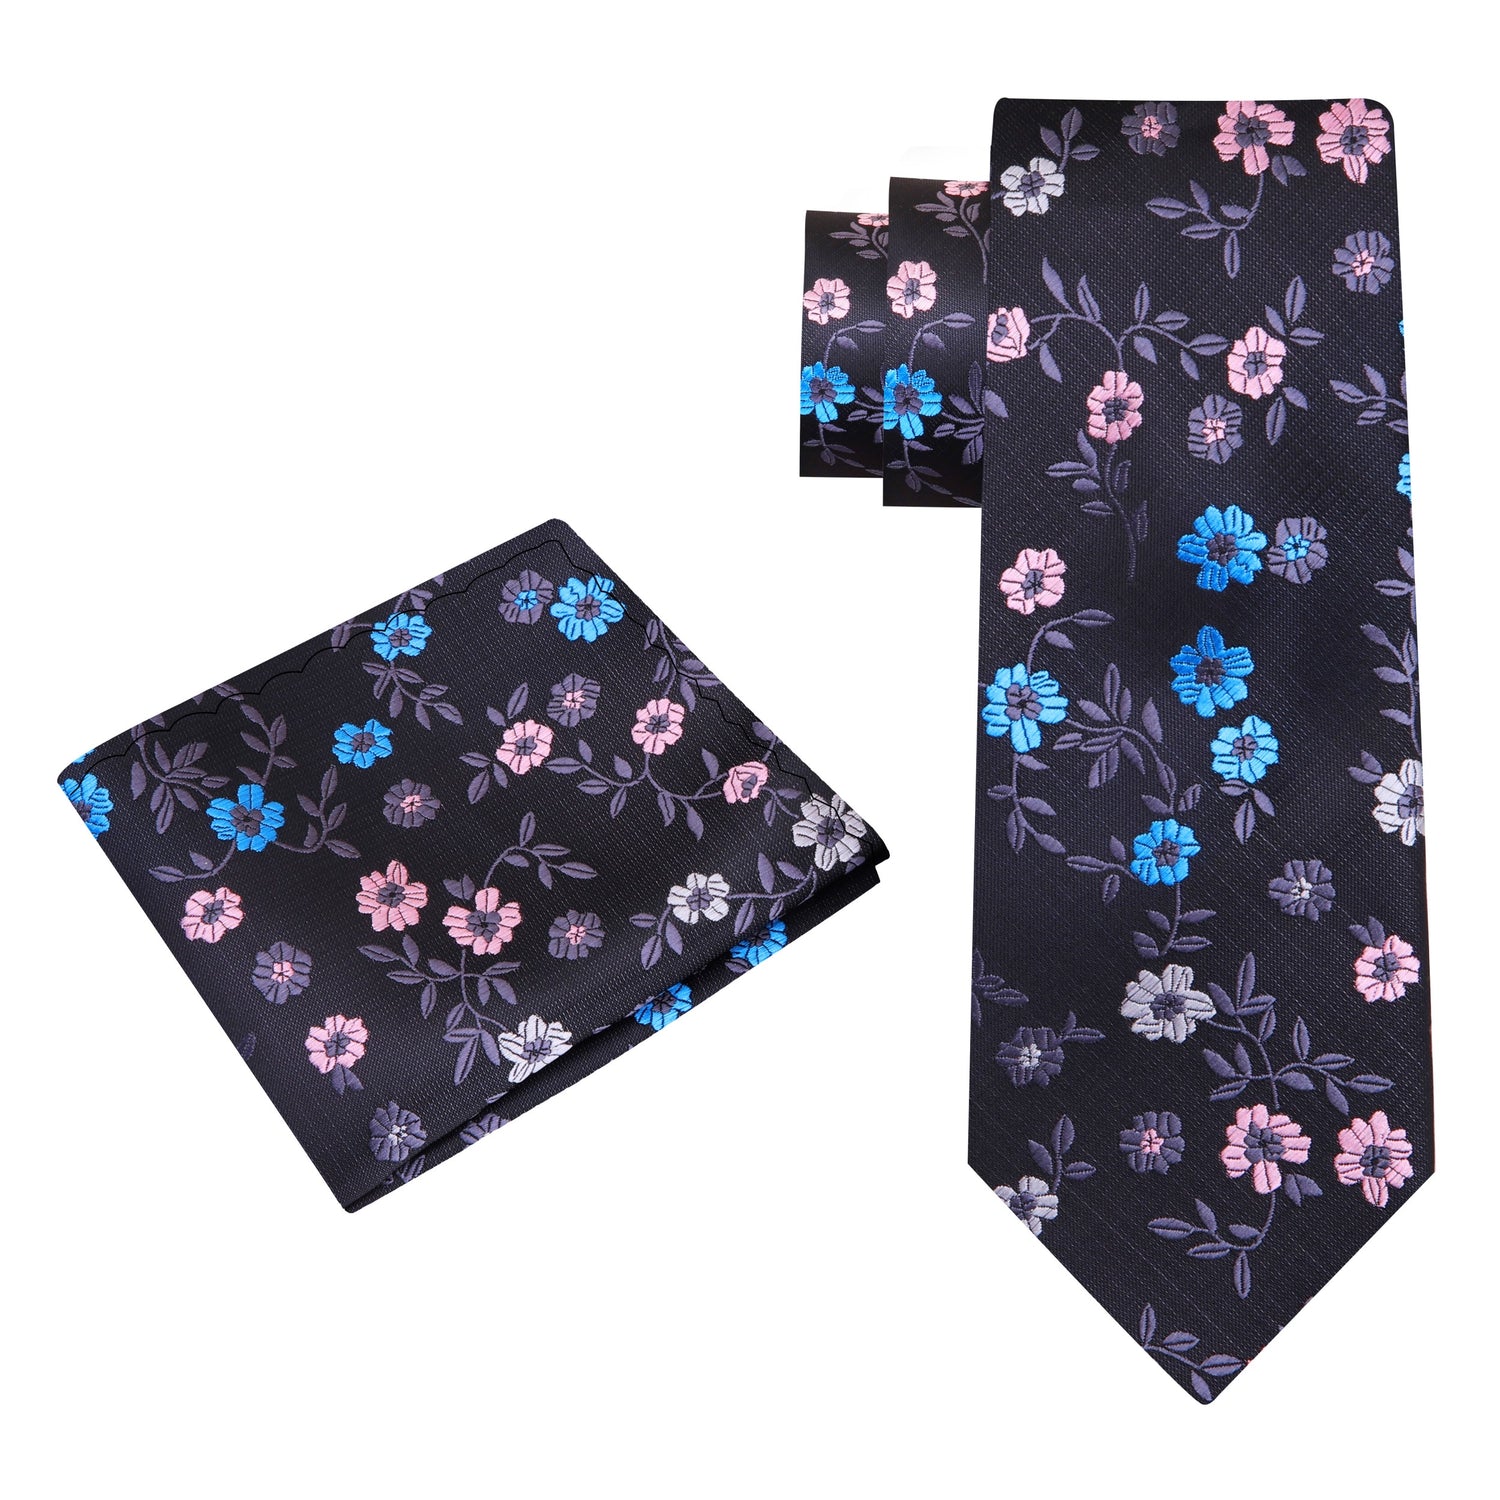 Alt View: Charcoal, Blue, Pink Flowers Tie and Pocket Square